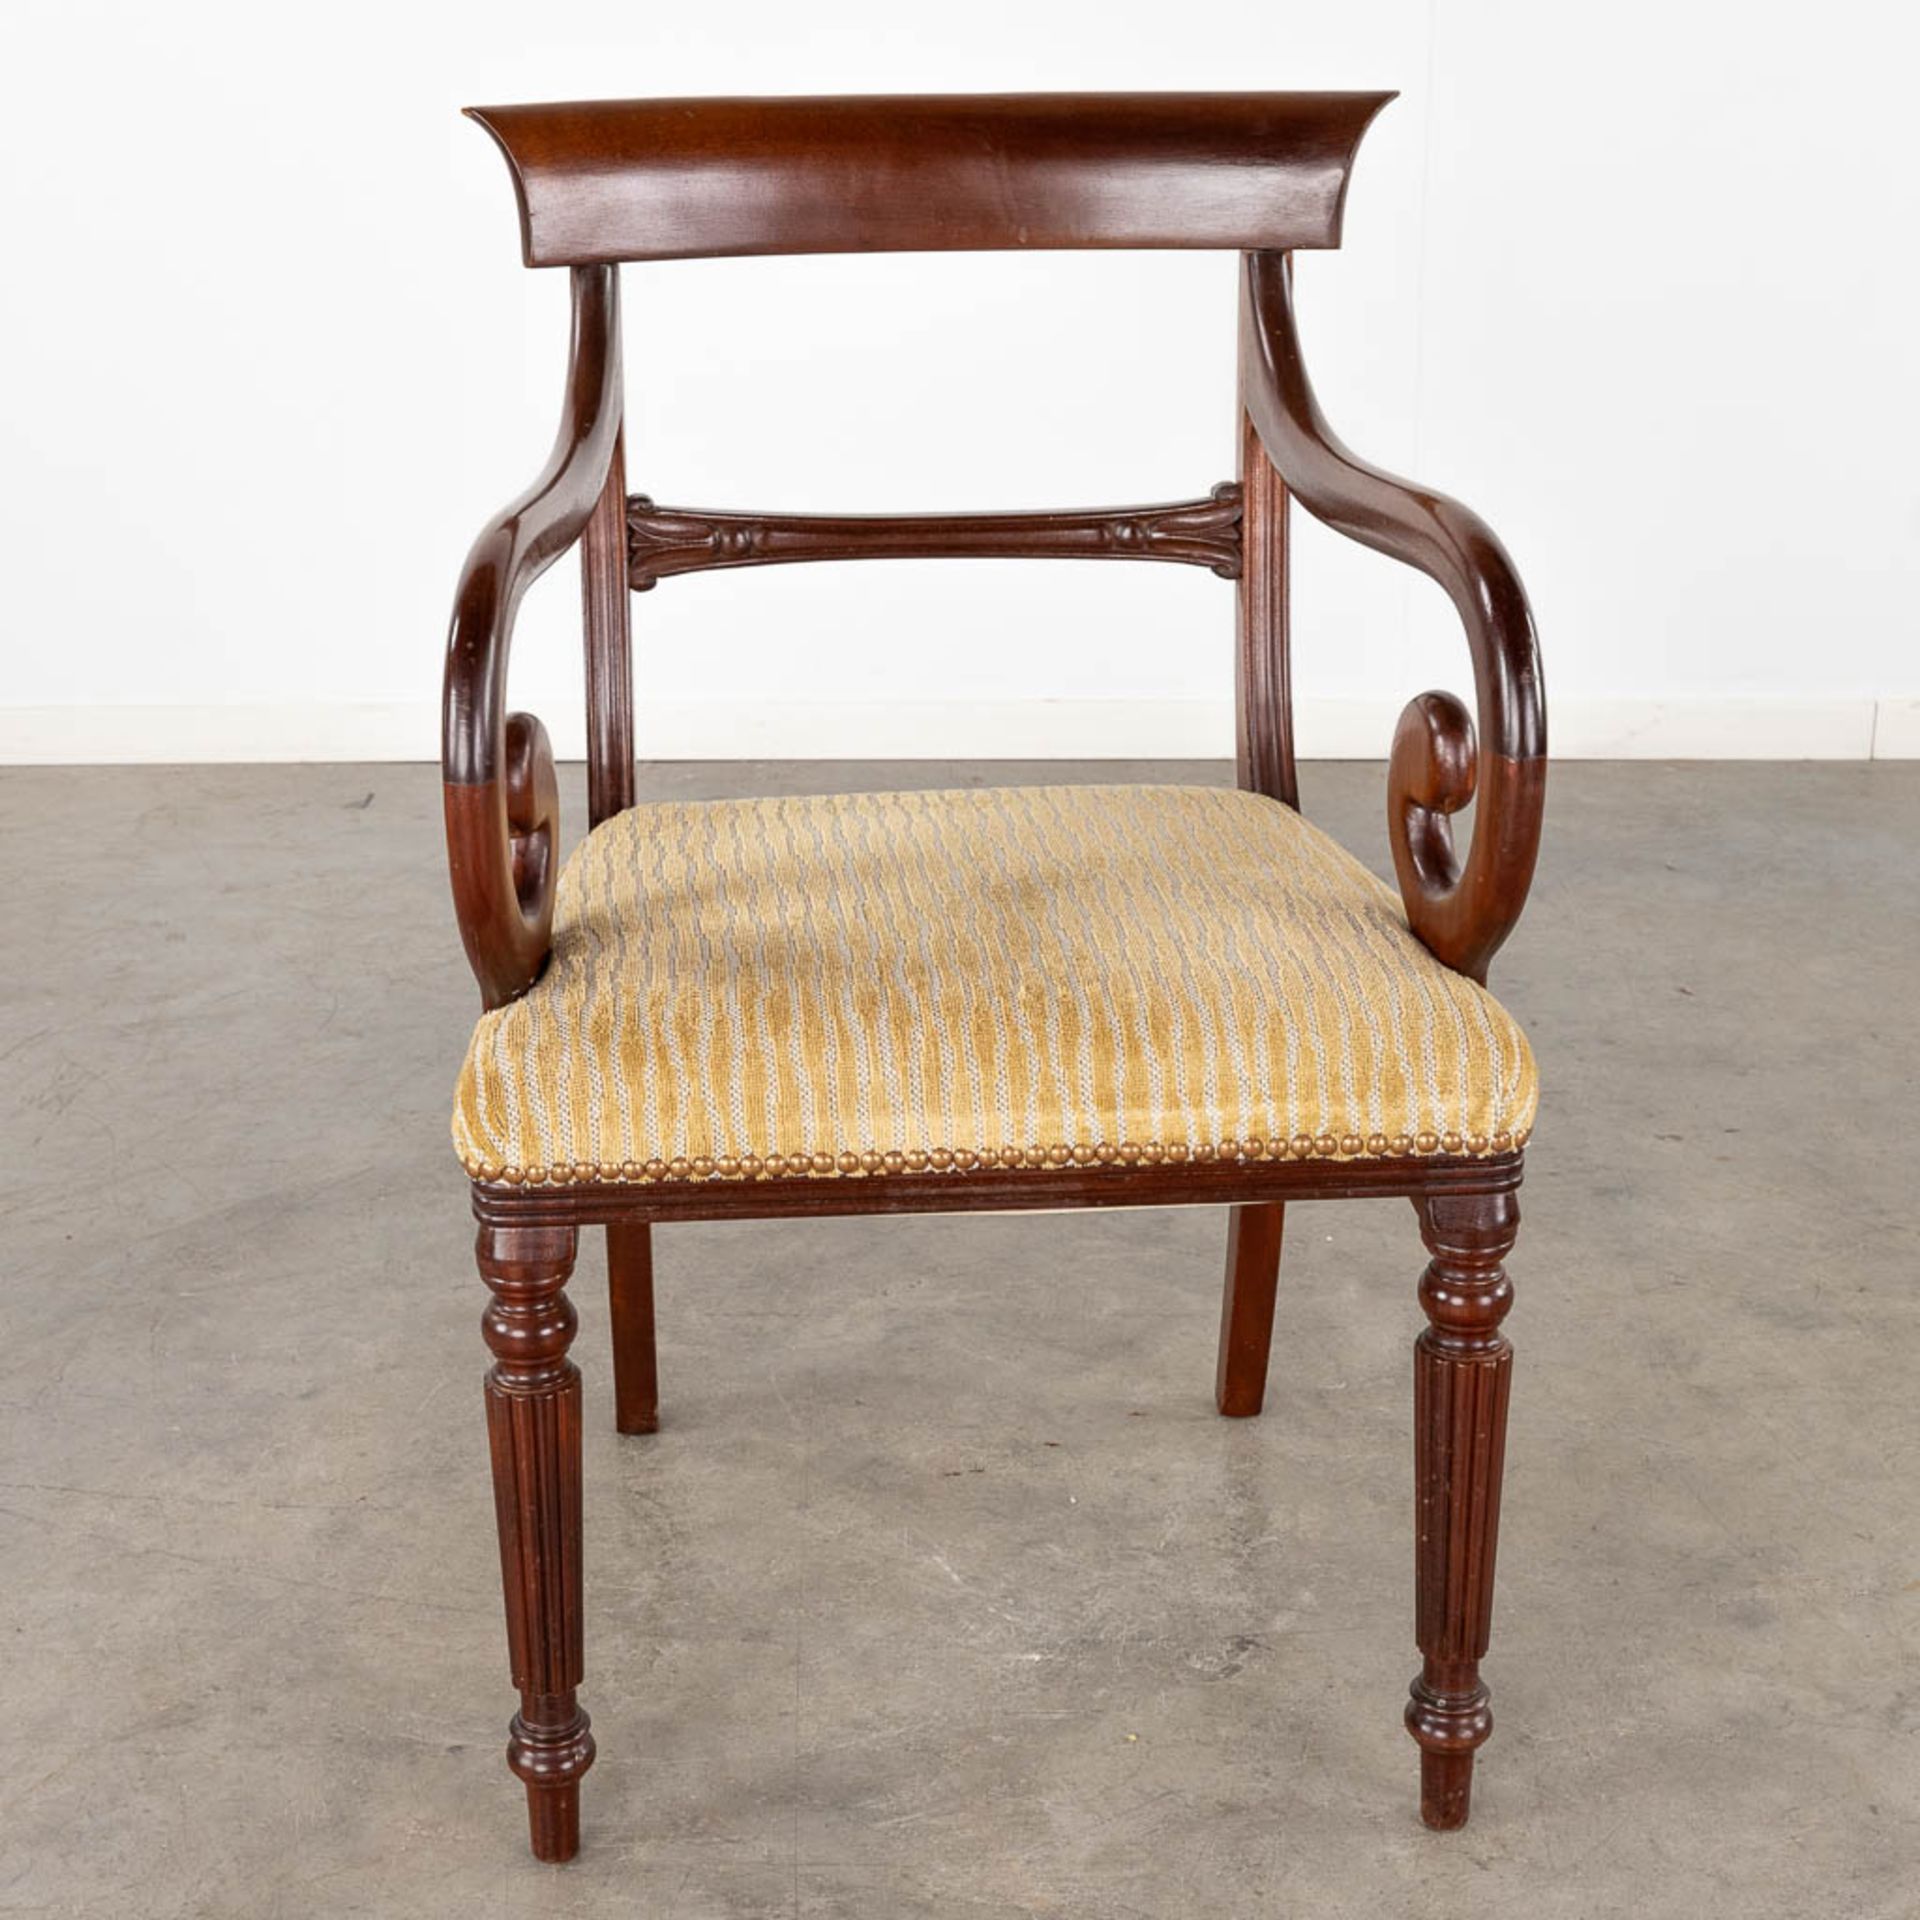 An extendible table, 6 chairs and two armchairs, Mahogany. England. 20th C. (D:144 x W:144 x H:75 cm - Image 14 of 22